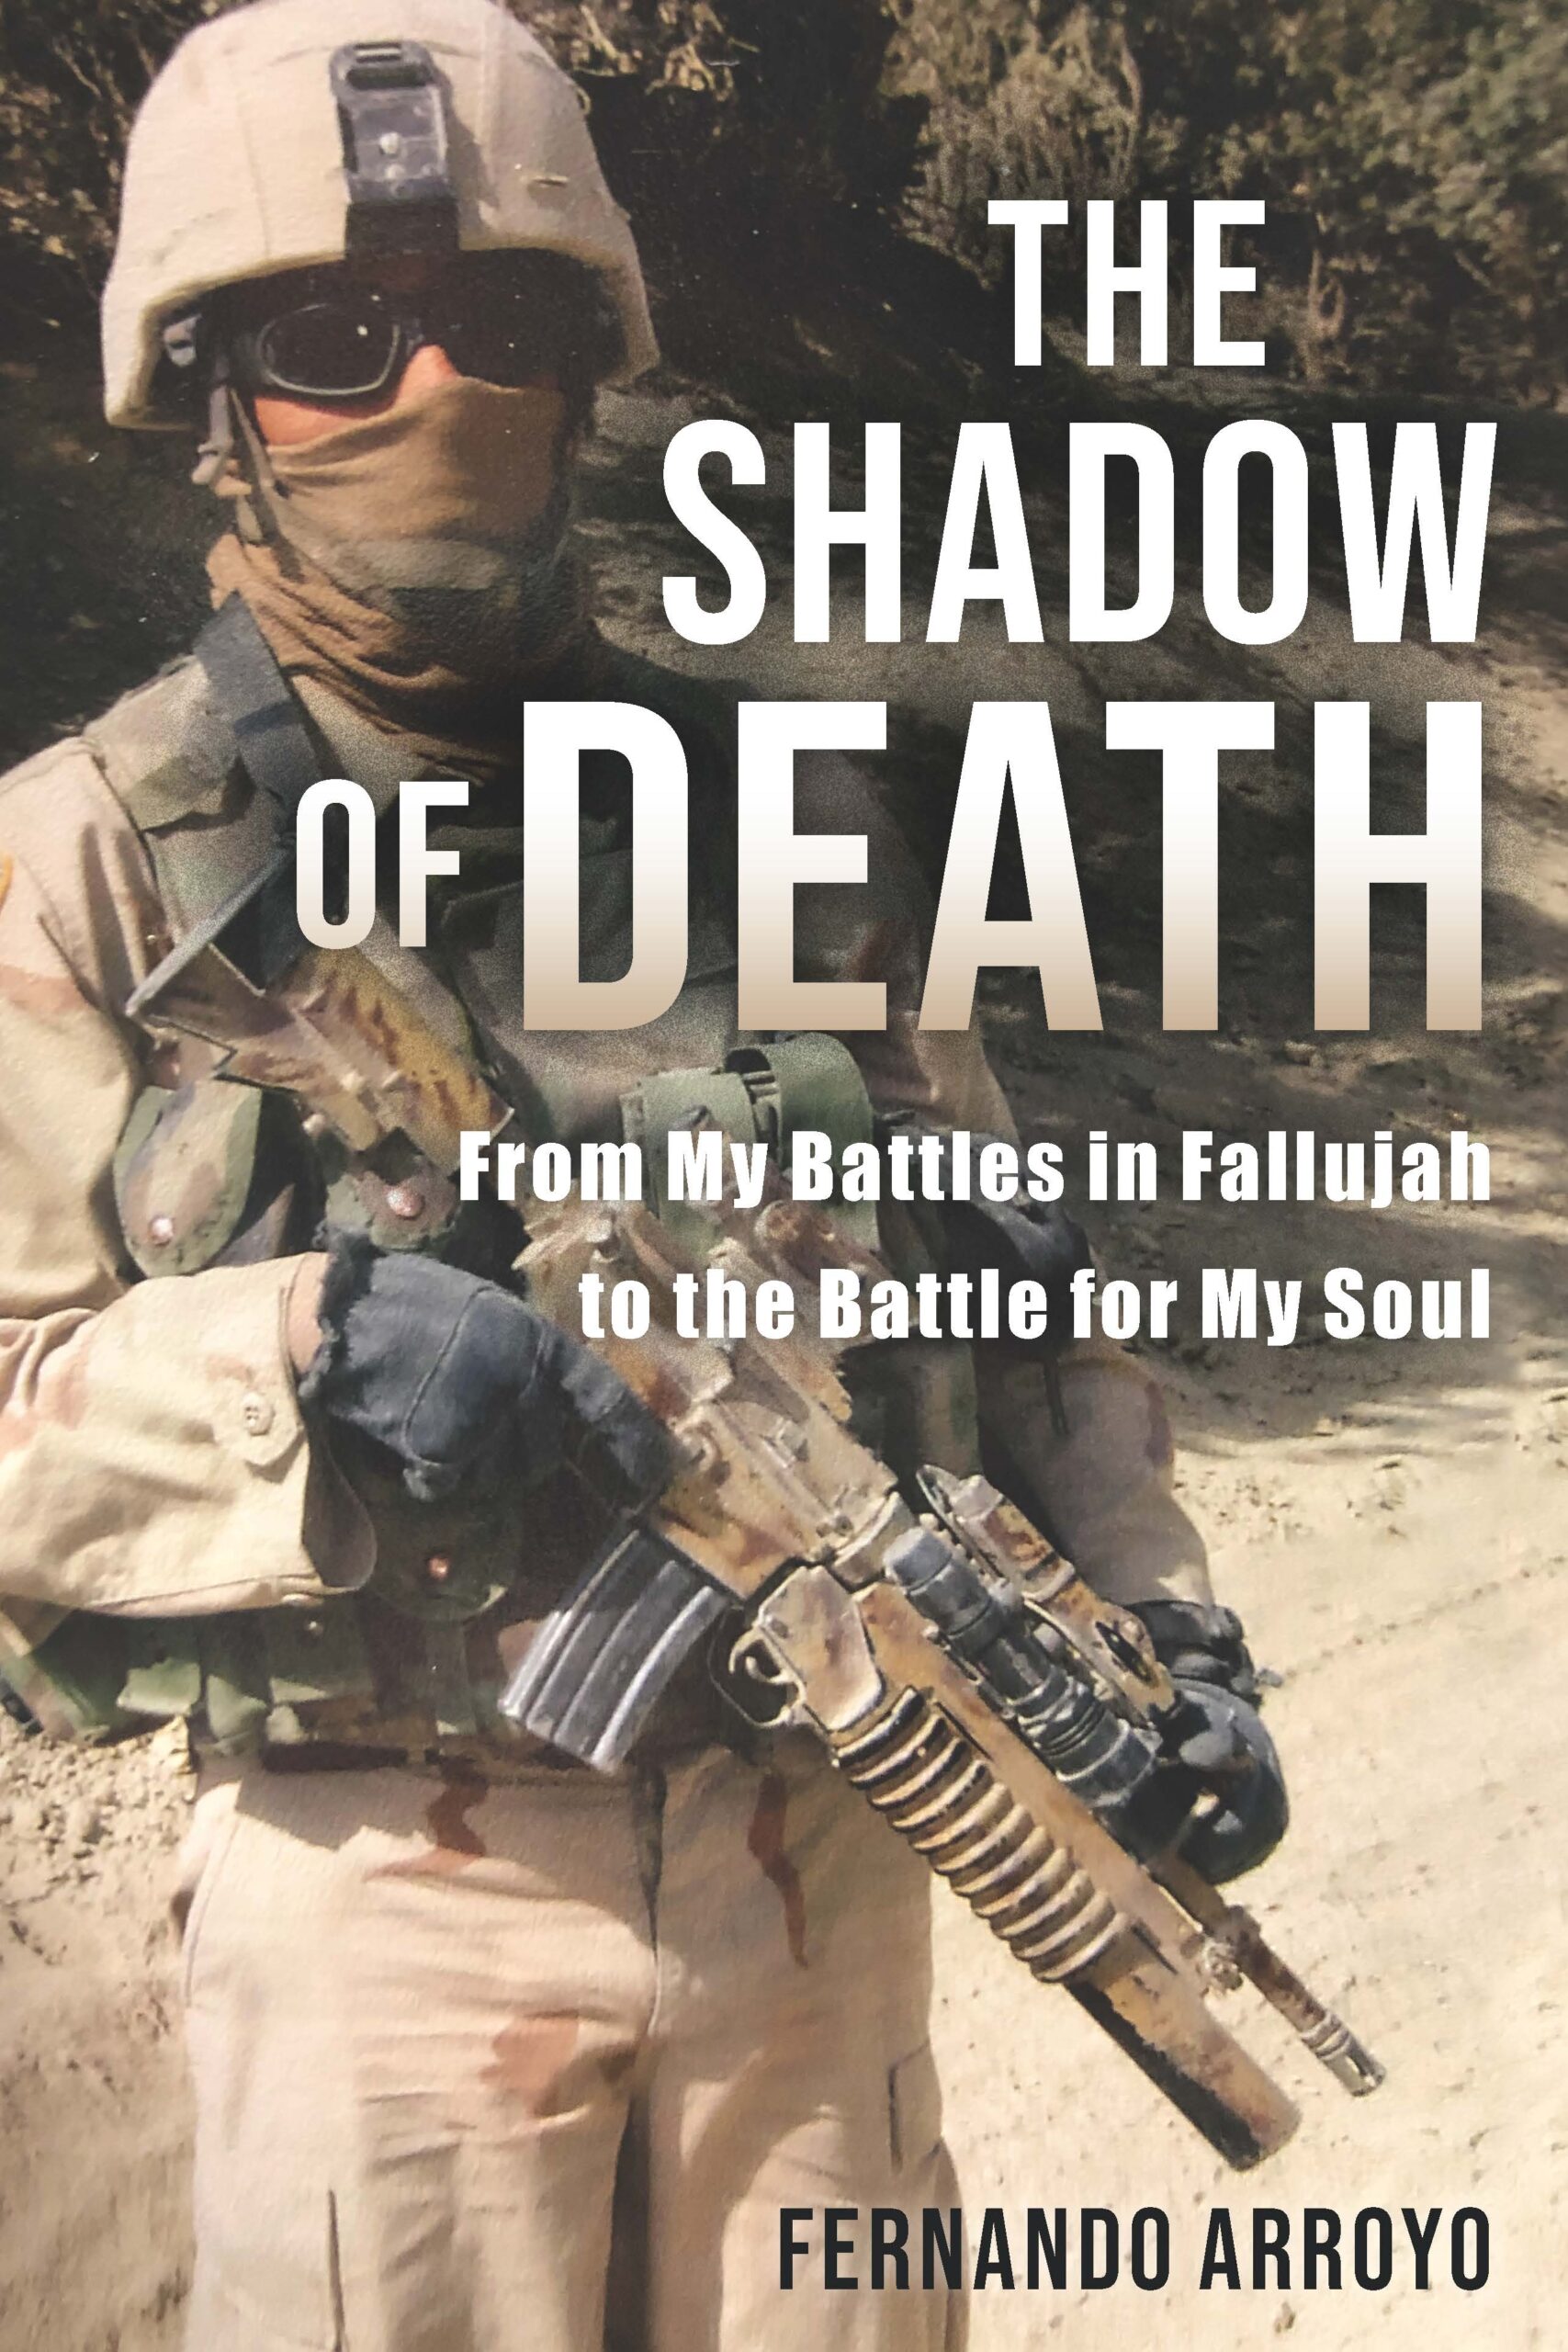 The Shadow of Death: From My Battles in Fallujah to the Battle for My Soul by Fernando Arroyo